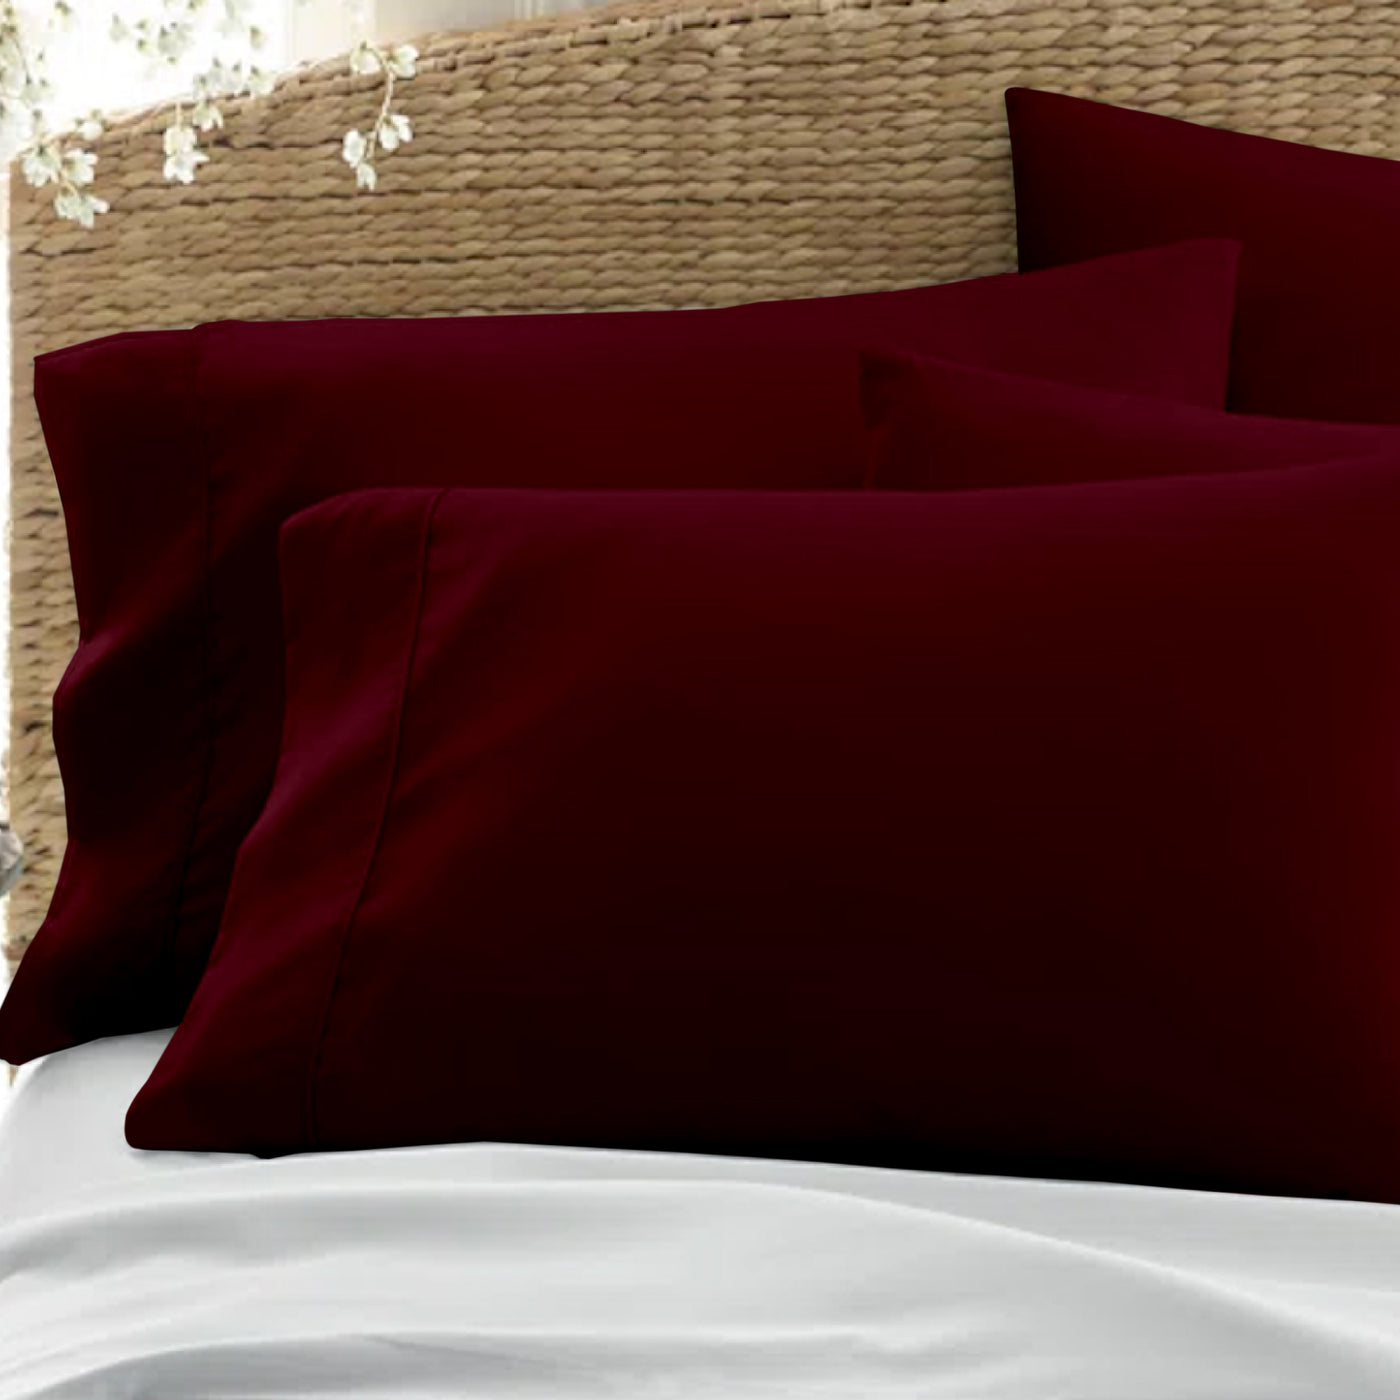 Set of 2 Solid Pillowcases 100% Egyptian Cotton 600 Thread Count